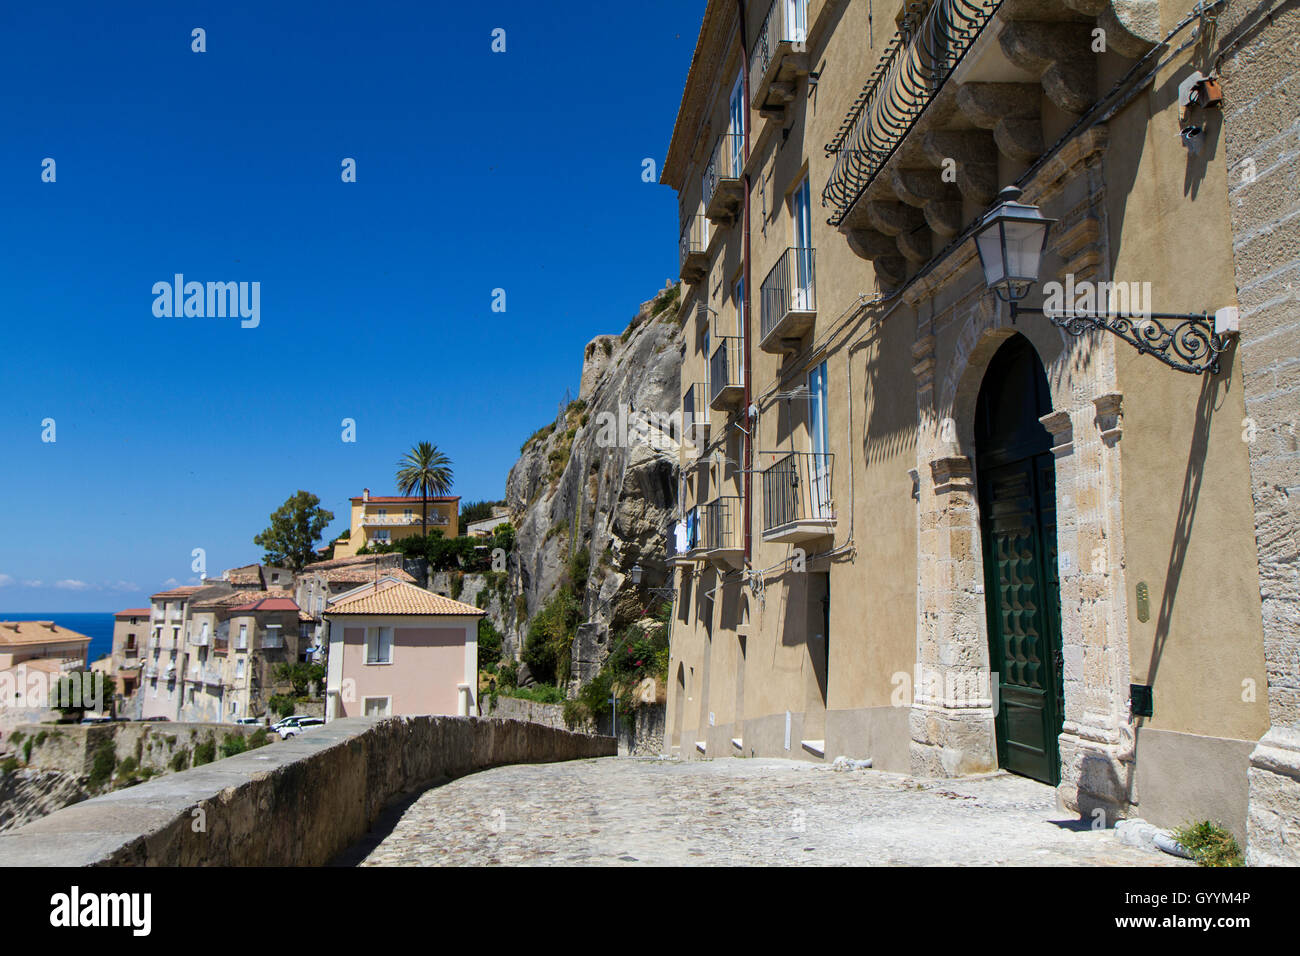 panorama of the houses in the old town of Amantea, Calabria Italy Stock Photo